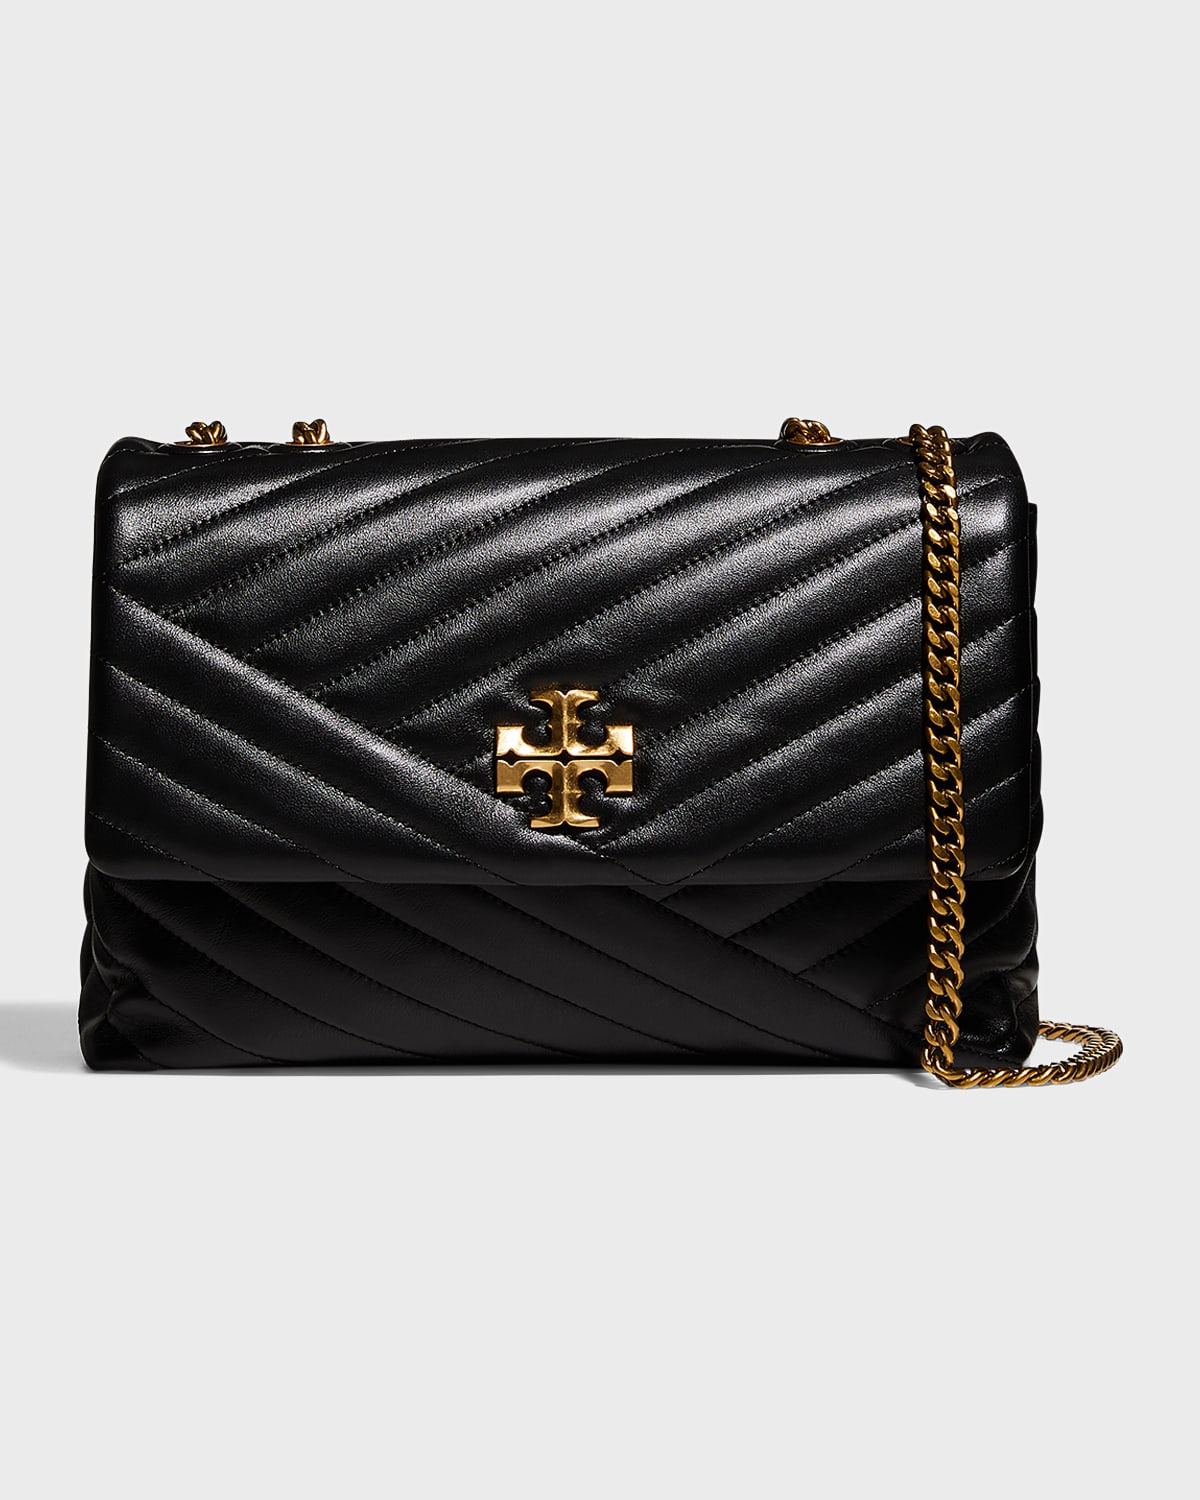 Tory Burch Kira Chevron-Quilted Leather Tote Bag | Neiman Marcus